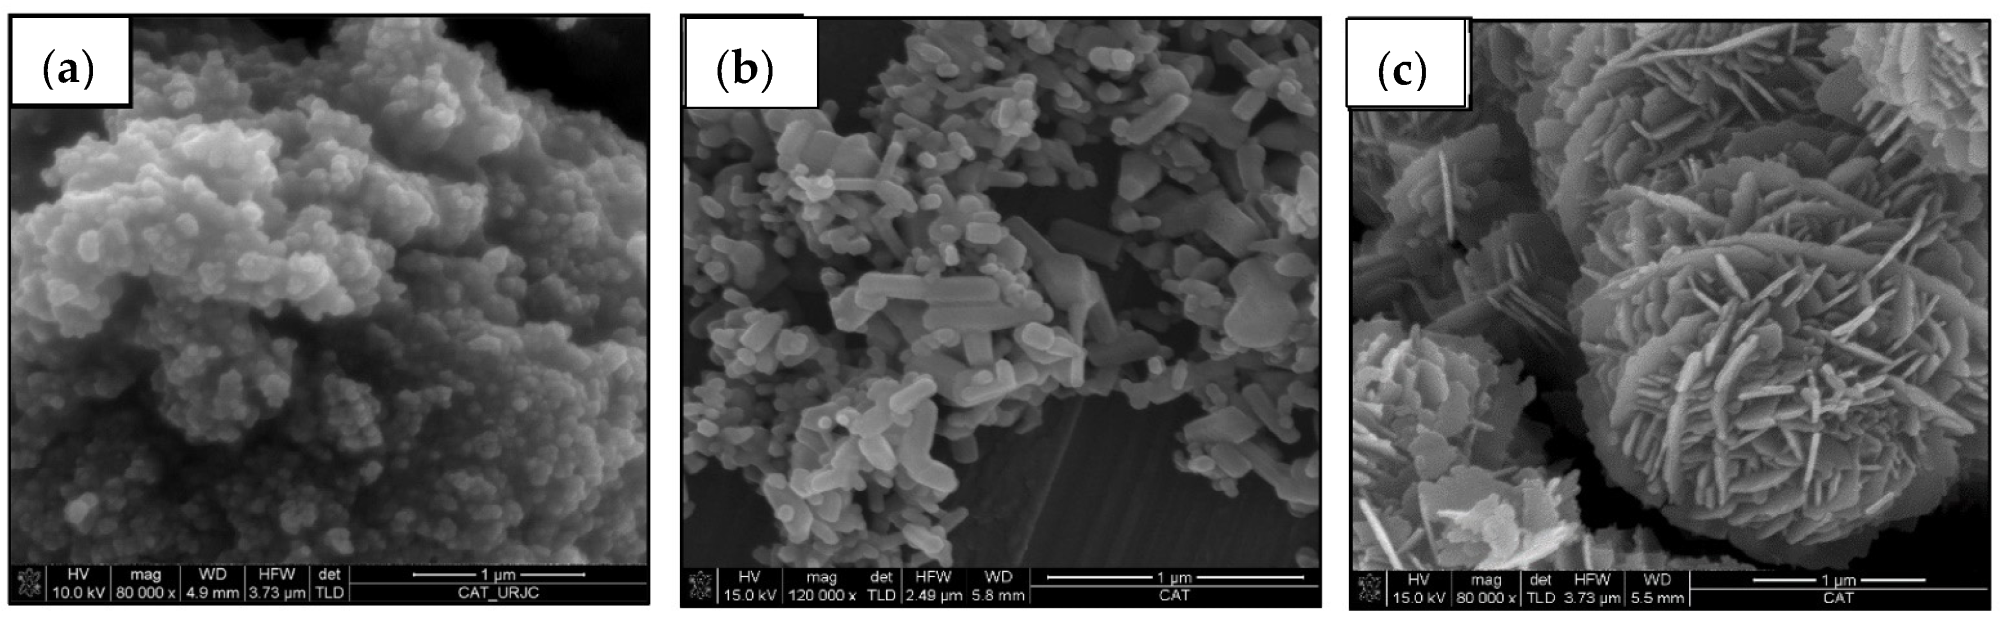 FEG-SEM micrographs of ceramic particles: (a) commercial TiO2, (b) commercial ZnO and (c) recycled ZnO.